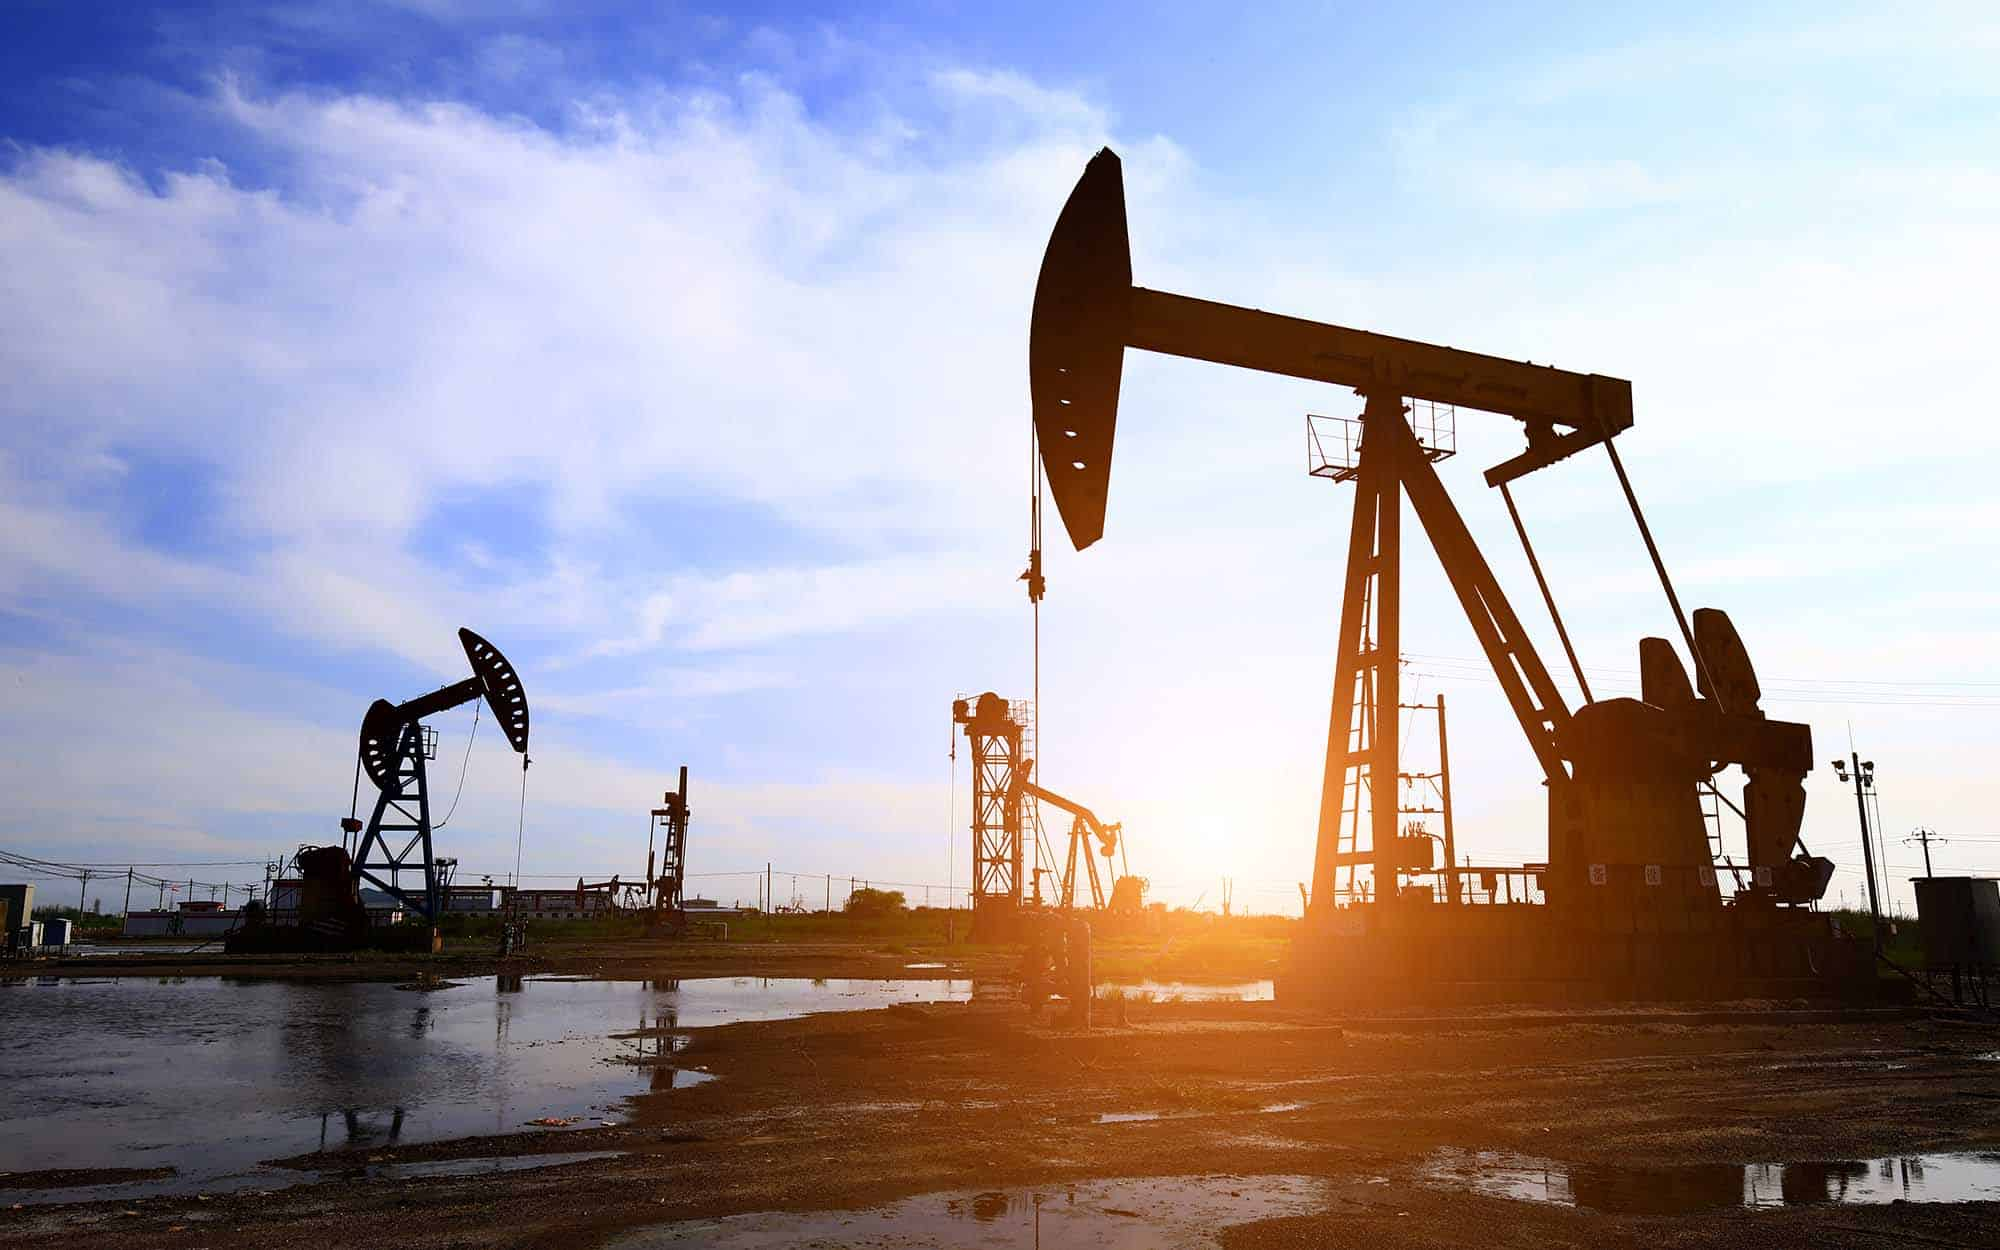 Property &amp; Casualty Insurance for Oil &amp; Gas'